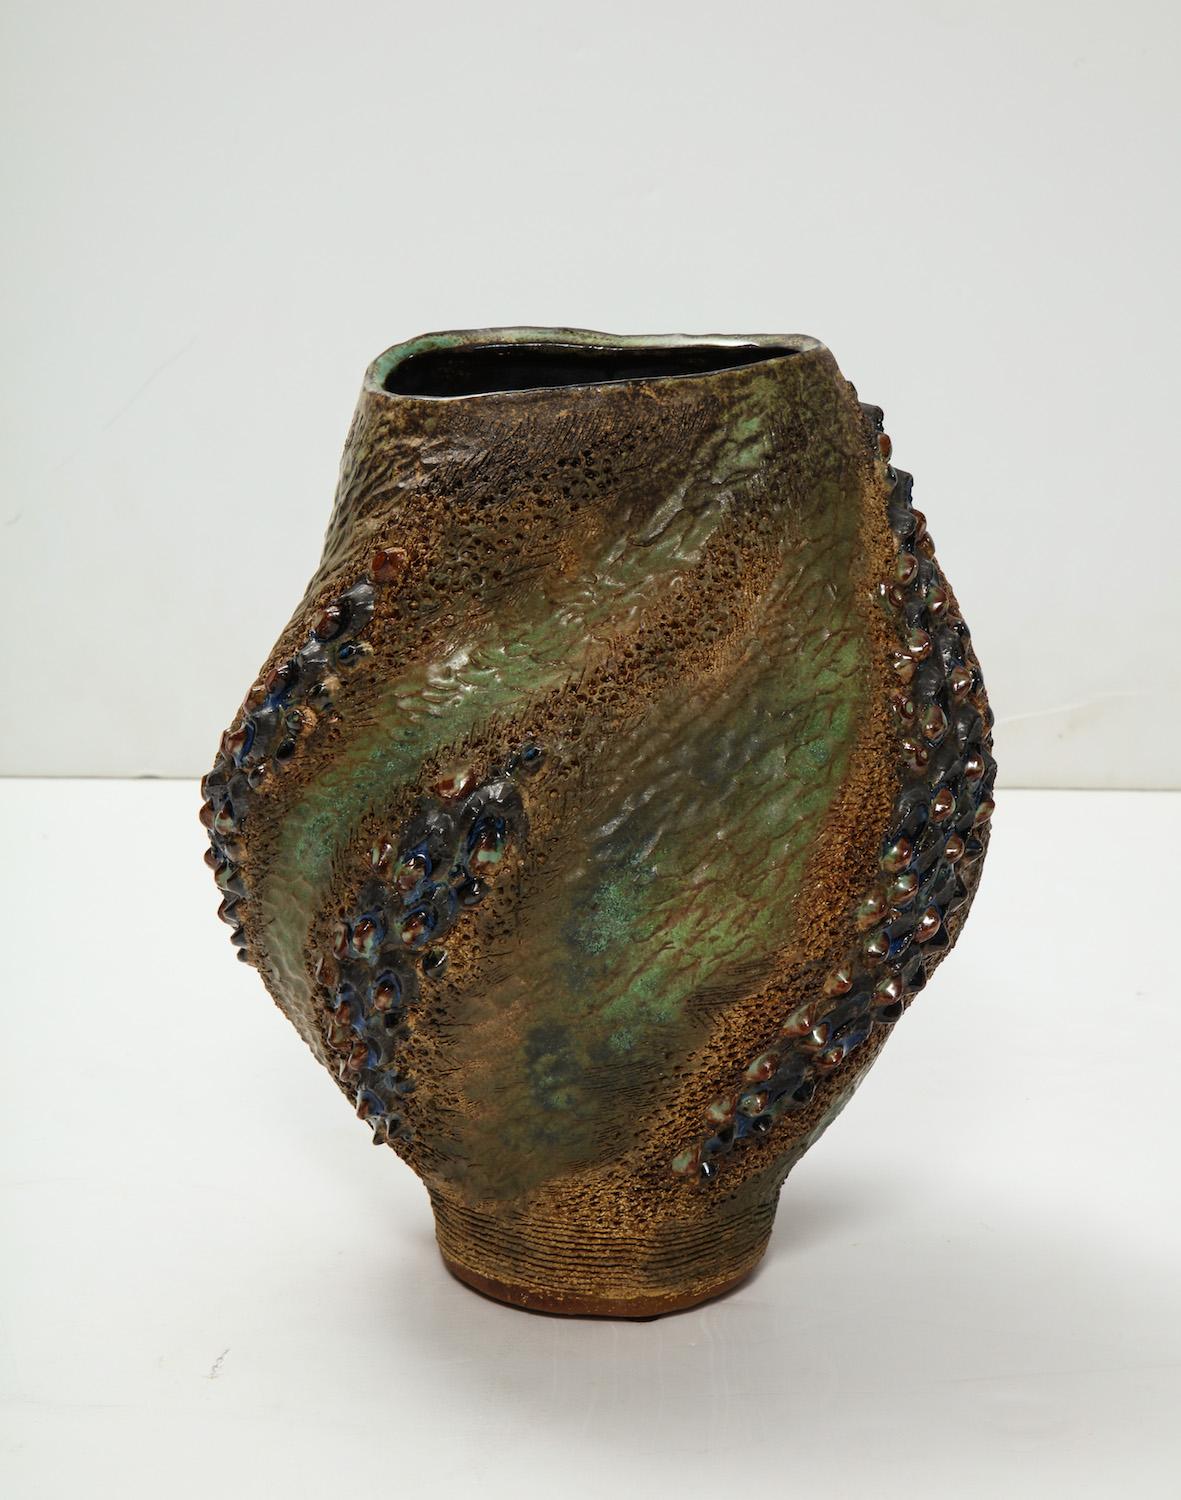 Hand-built earthenware vase with texture and movement throughout. Great earth tone glazes suggesting flames. Artist-signed and dated on underside.